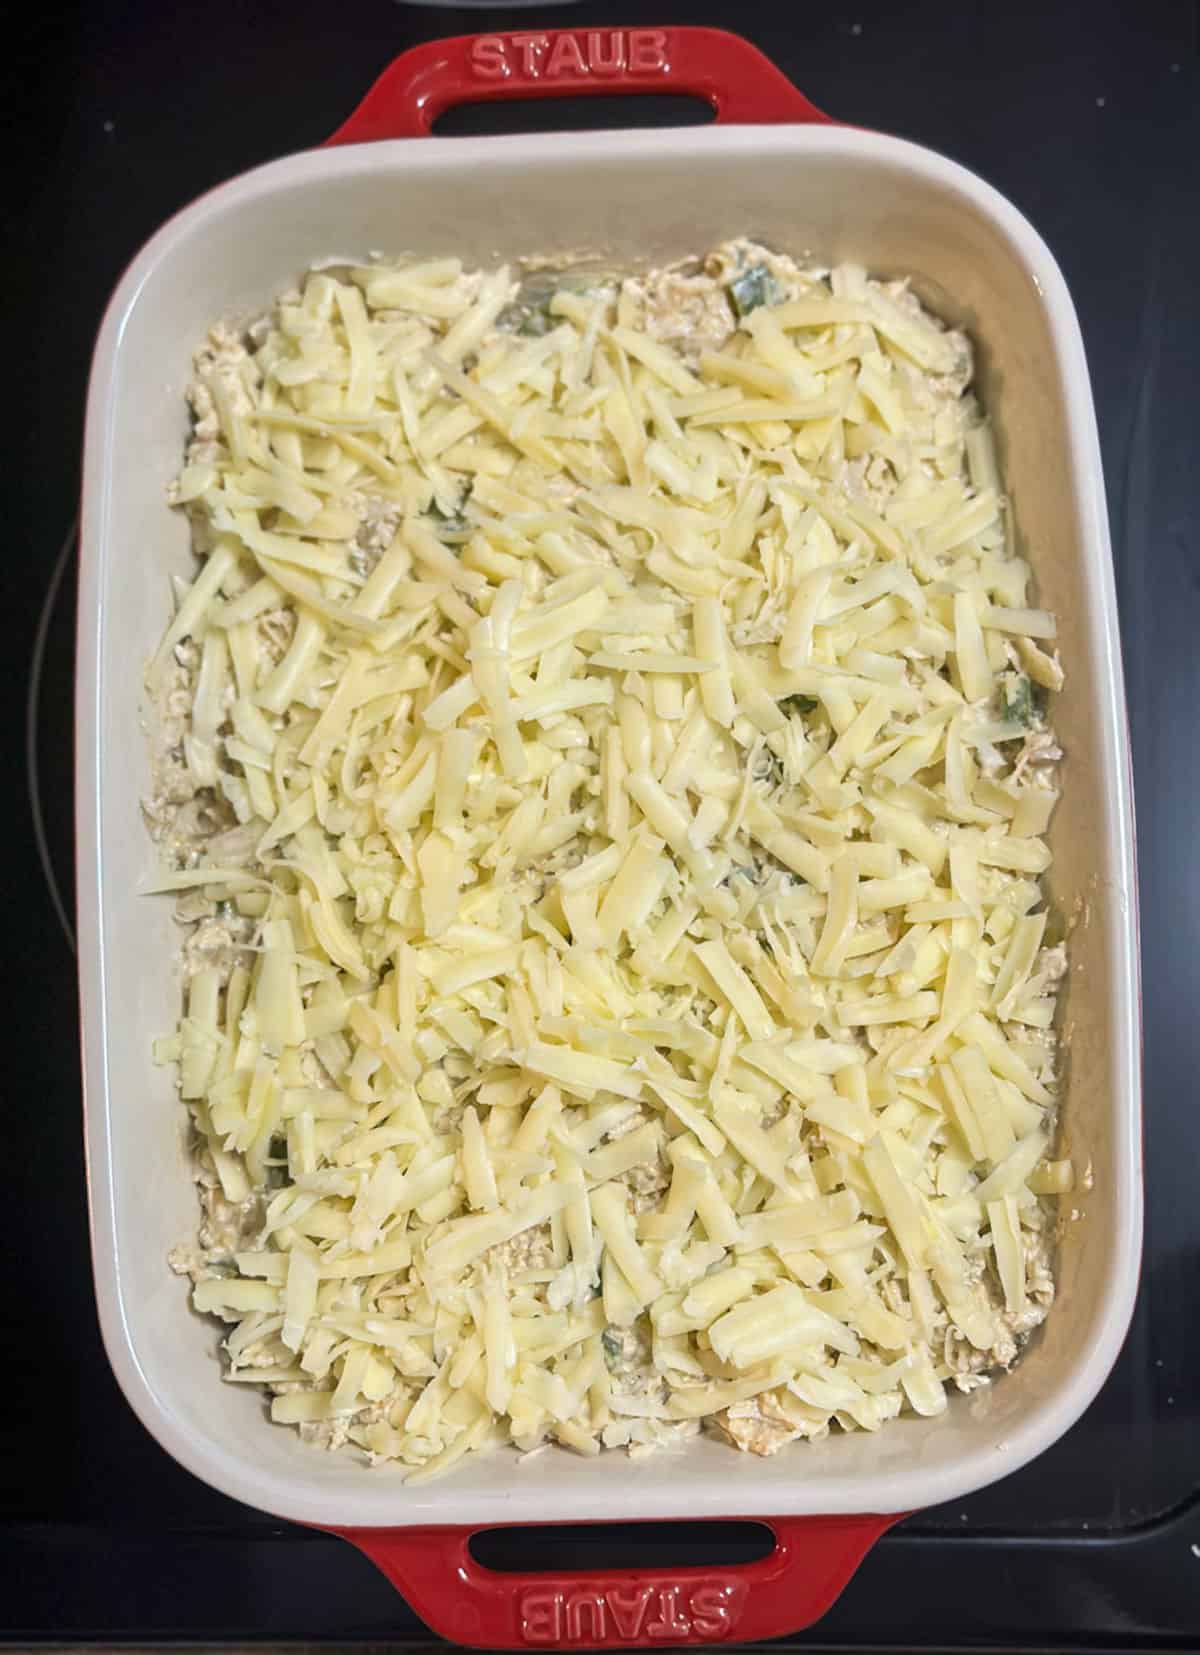 A red and white Staub casserole dish with creamy chicken and green chili mixture topped with shredded Monterey jack cheese, ready to put in the oven.